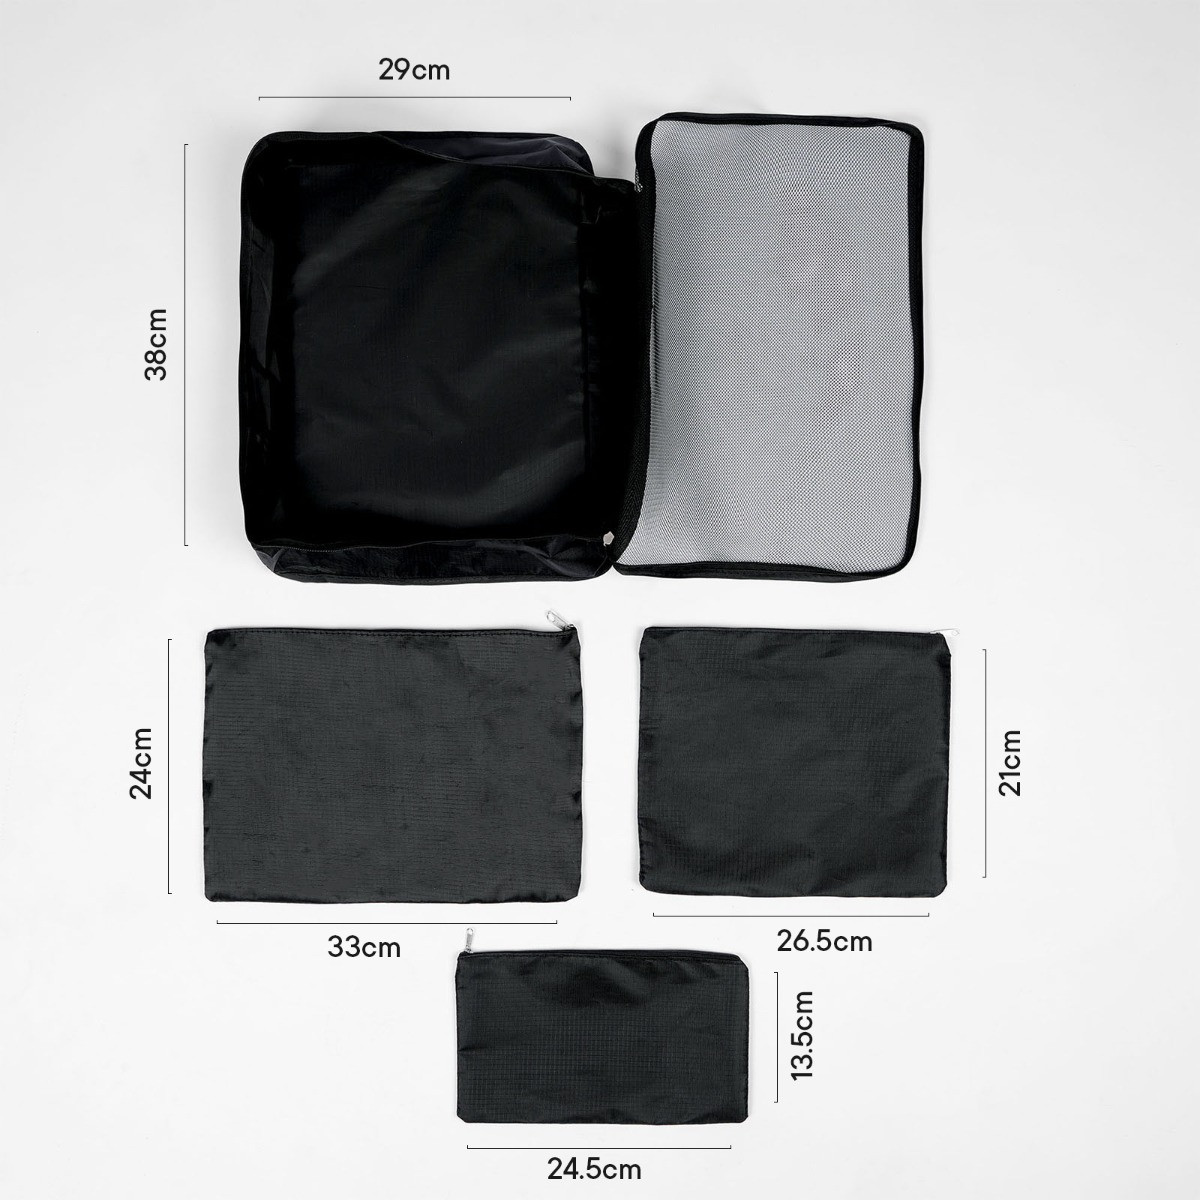 OHS Travel Packing Cube And Bag Set, Black - 4 Piece >